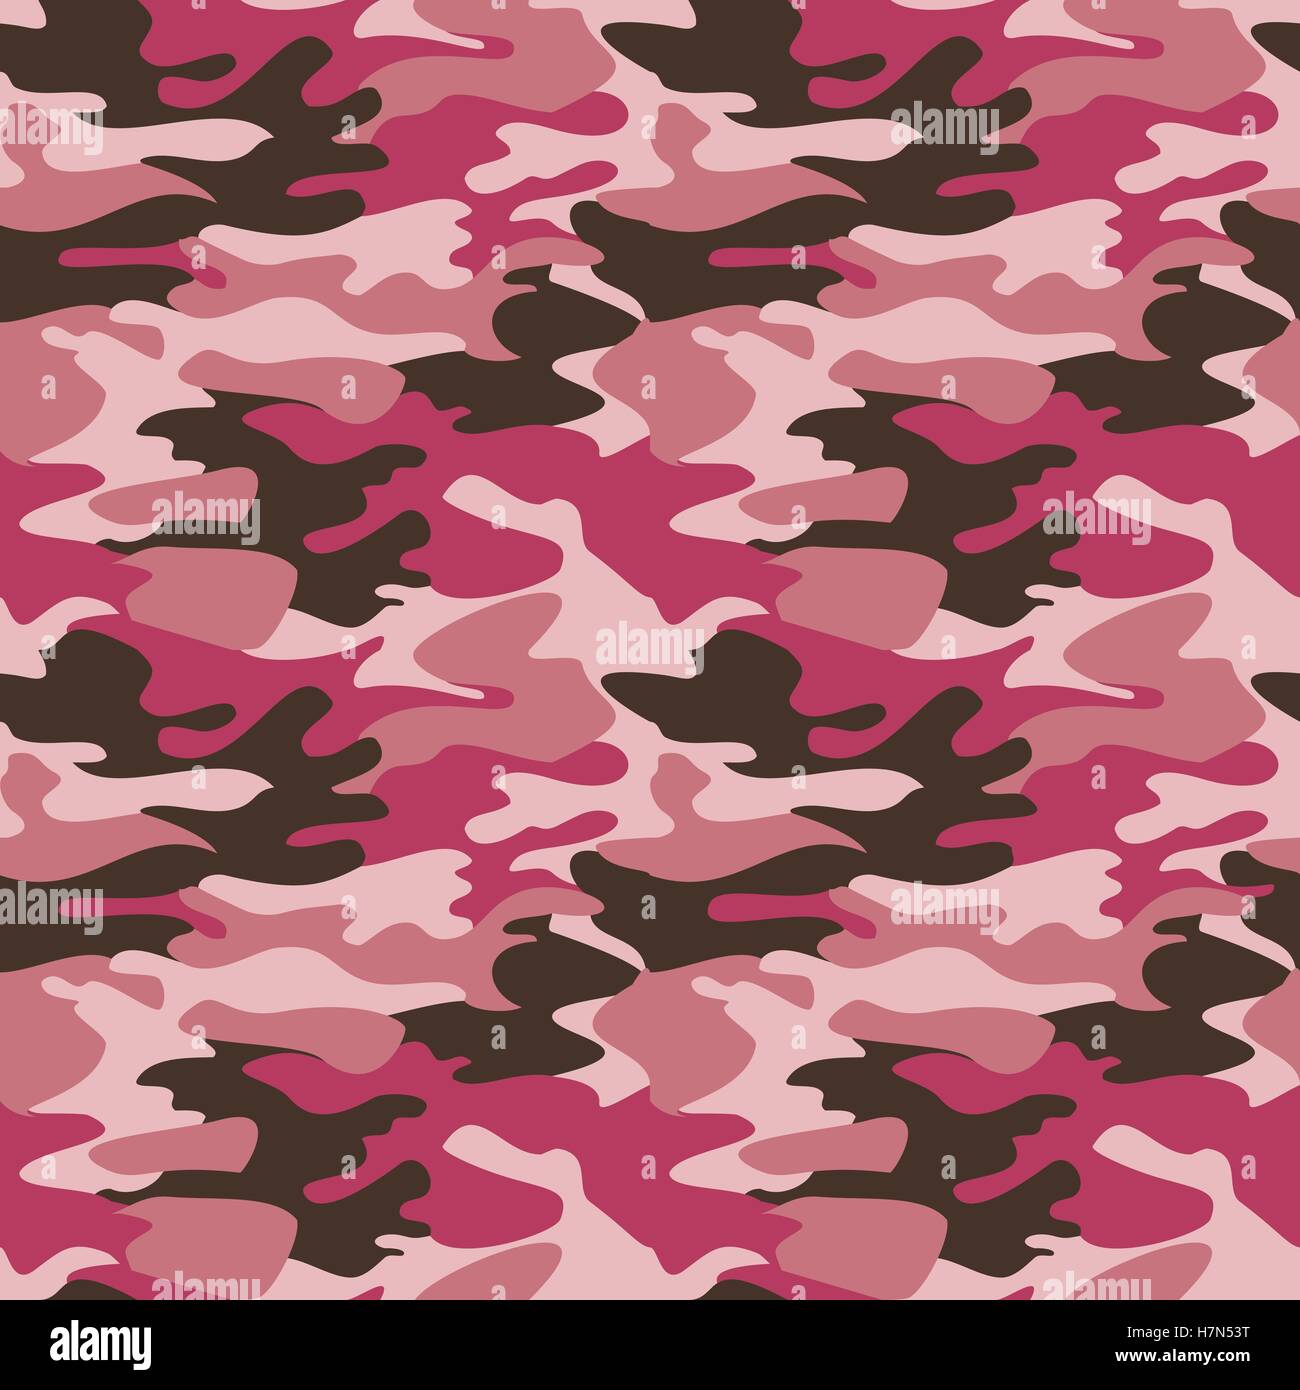 Camouflage pattern background seamless vector Stock Vector